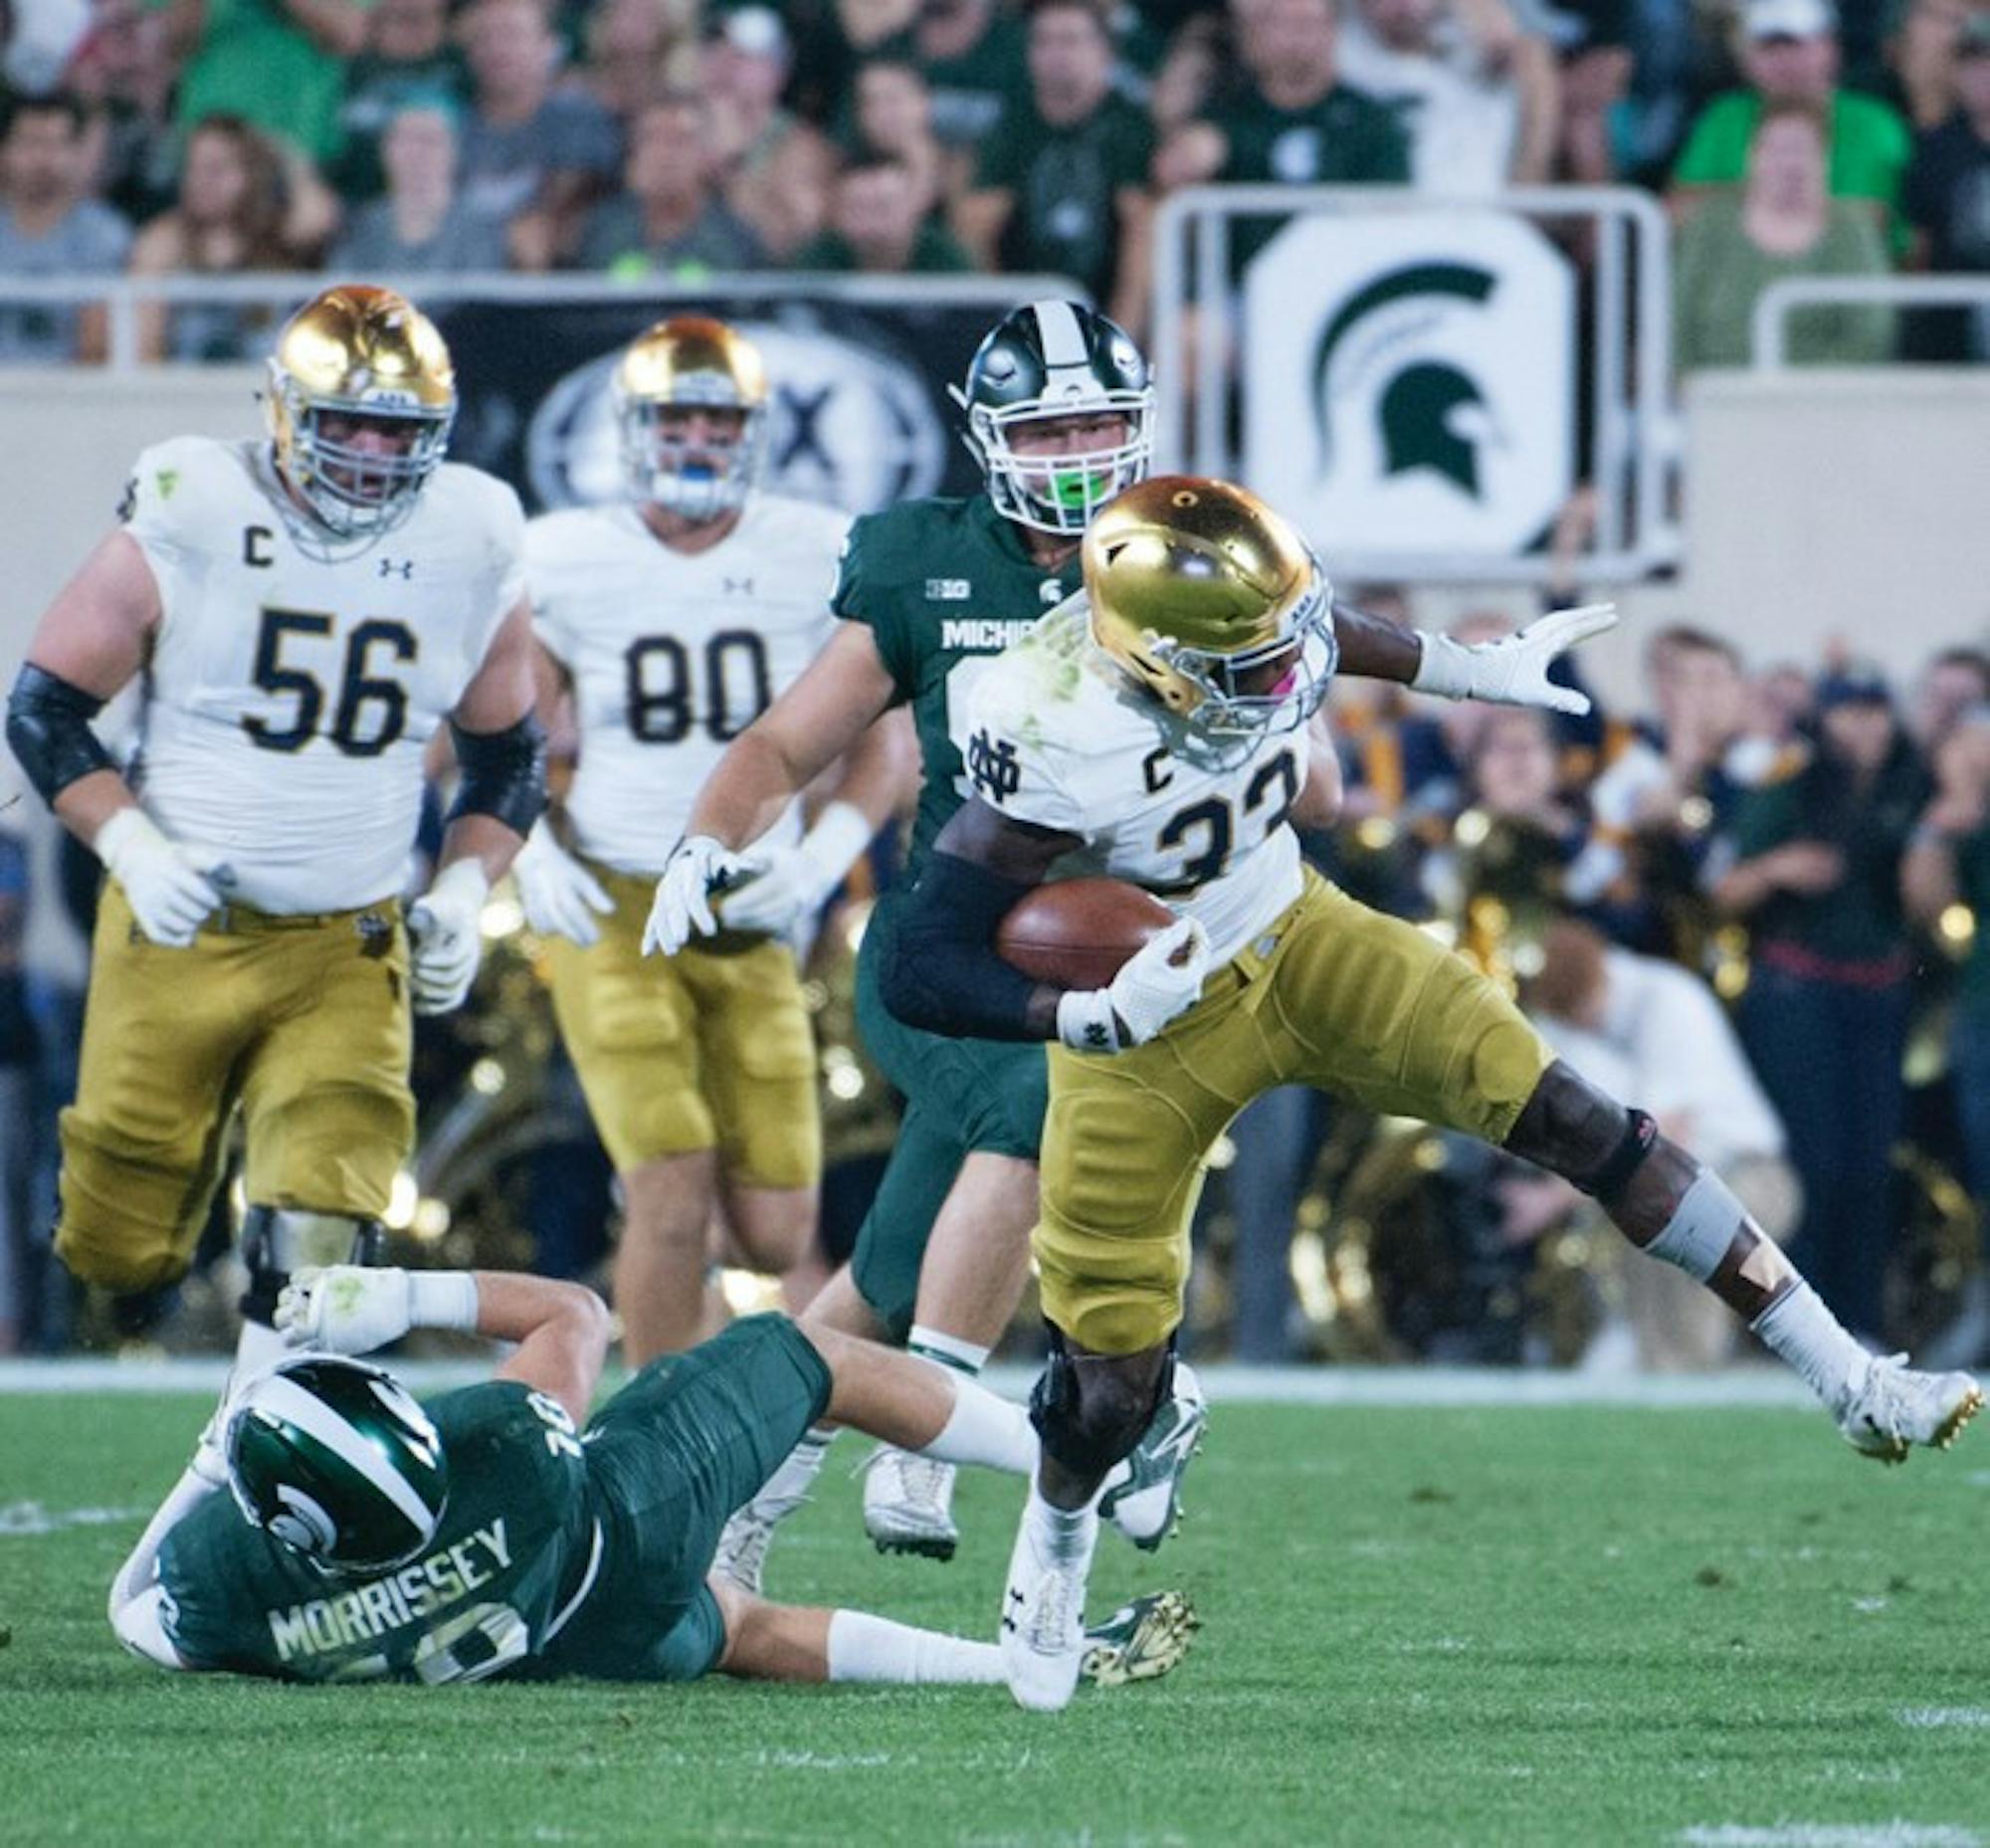 Junior Irish running back Josh Adams tries to keep his balance after breaking a tackle during Notre Dame's 38-18 win over Michigan State on Sept. 23.